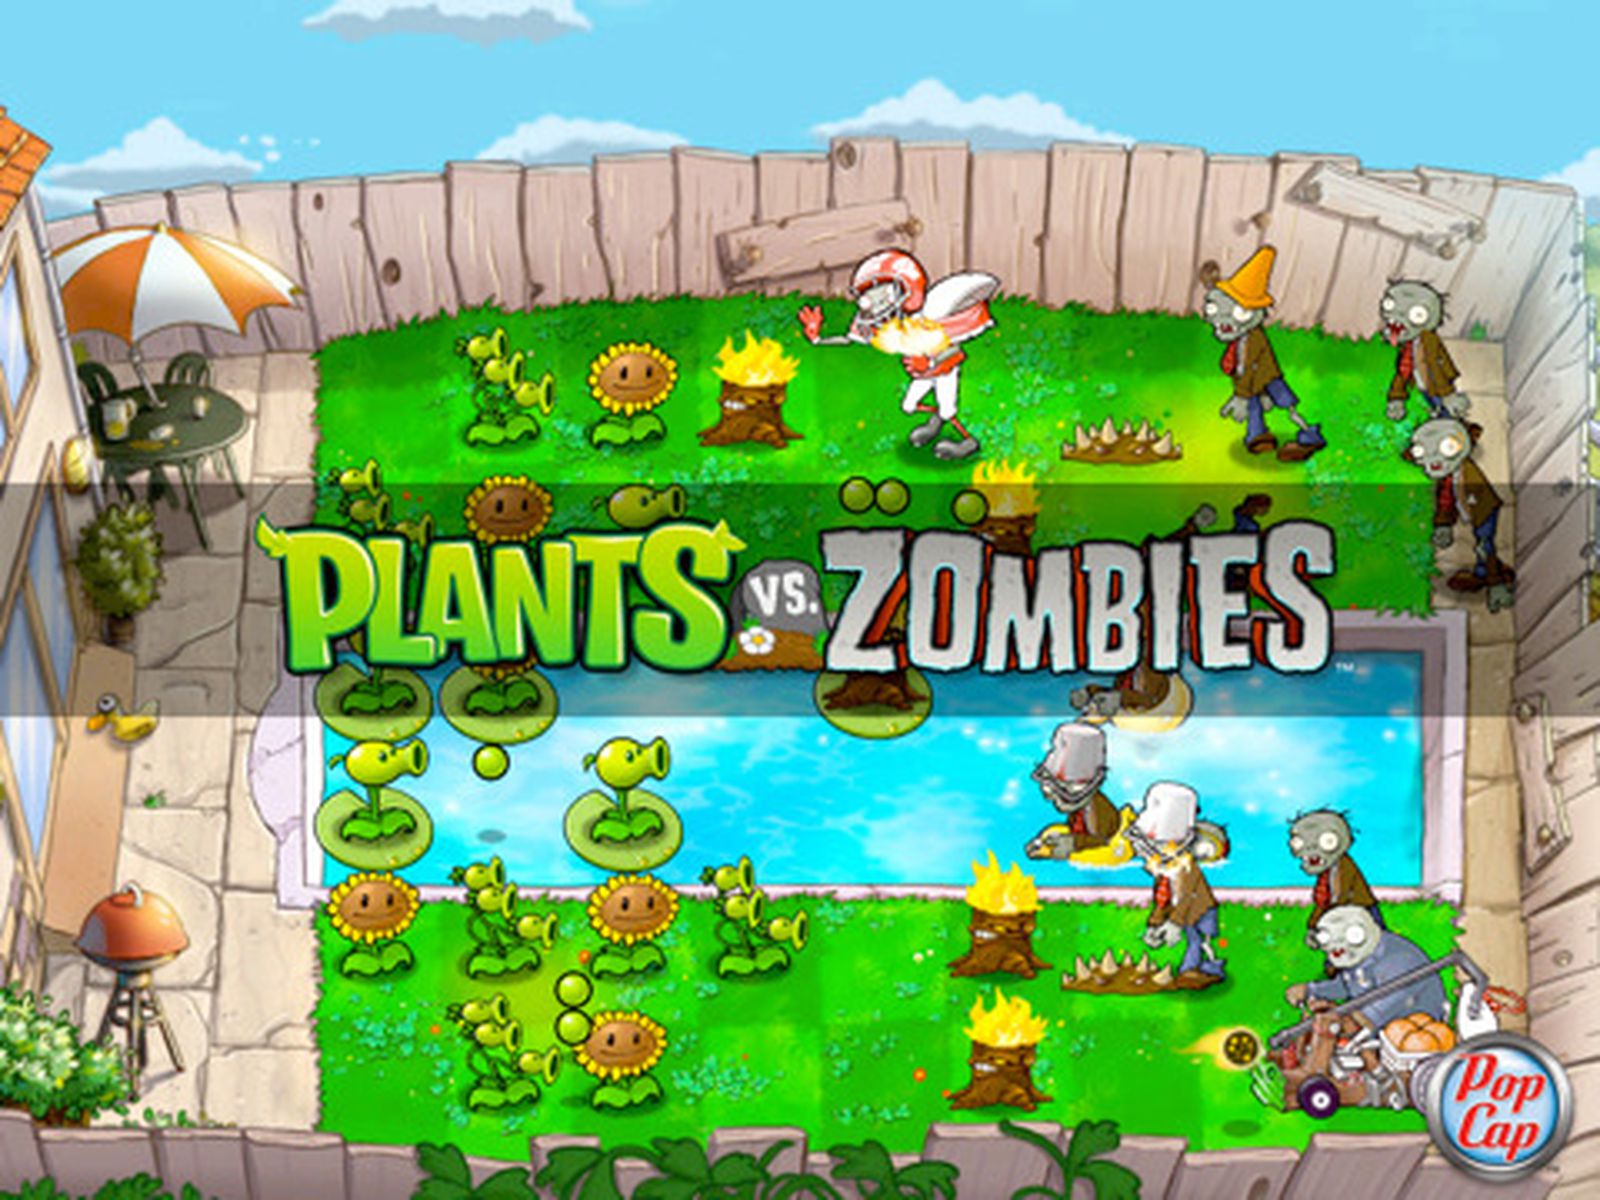 Plants vs. Zombies 2: It's About Time on iOS